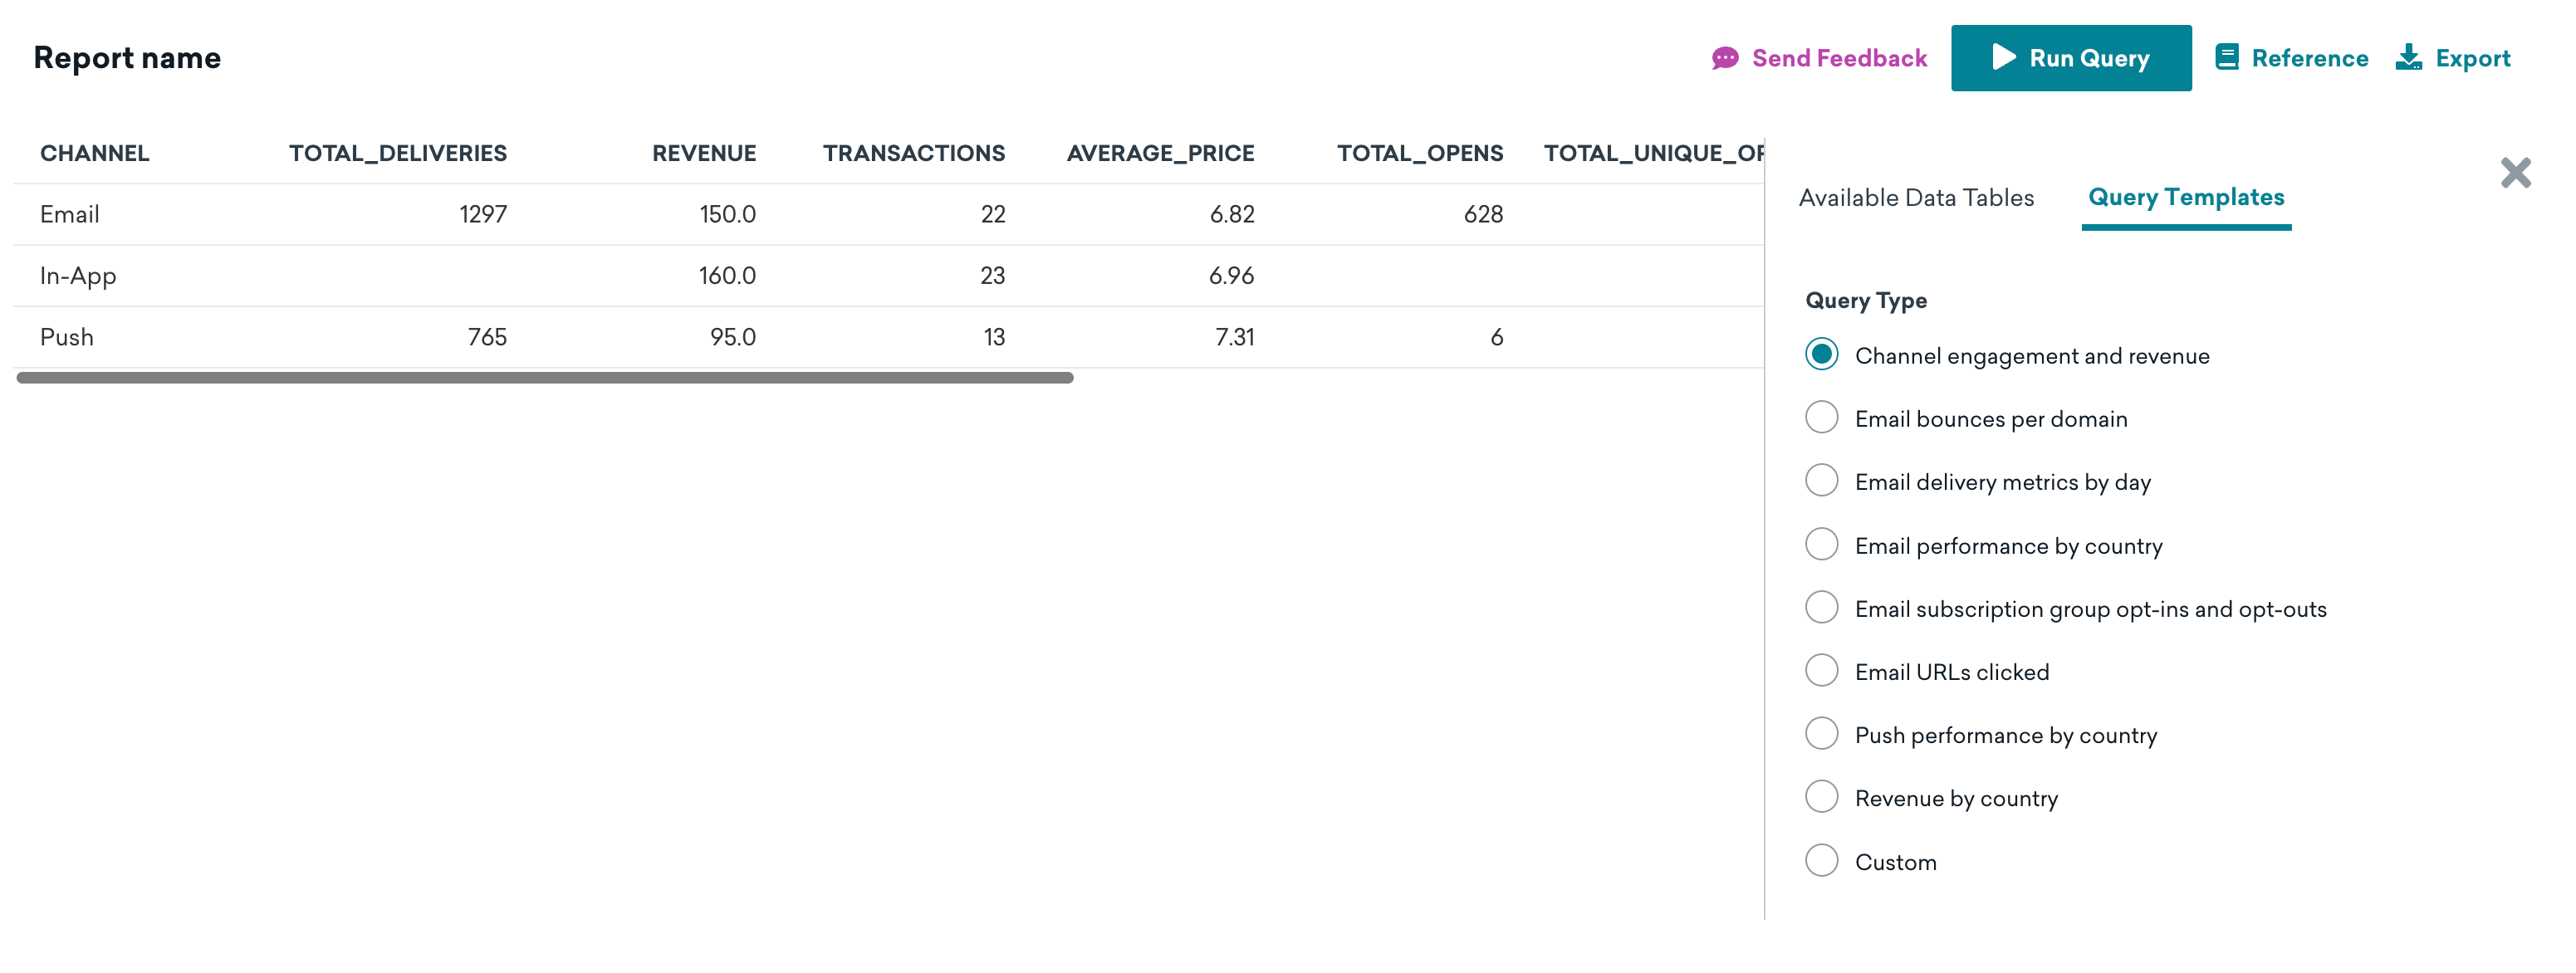 Query builder showing the results for the templated query "Channel engagement and revenue for the last 30 days".